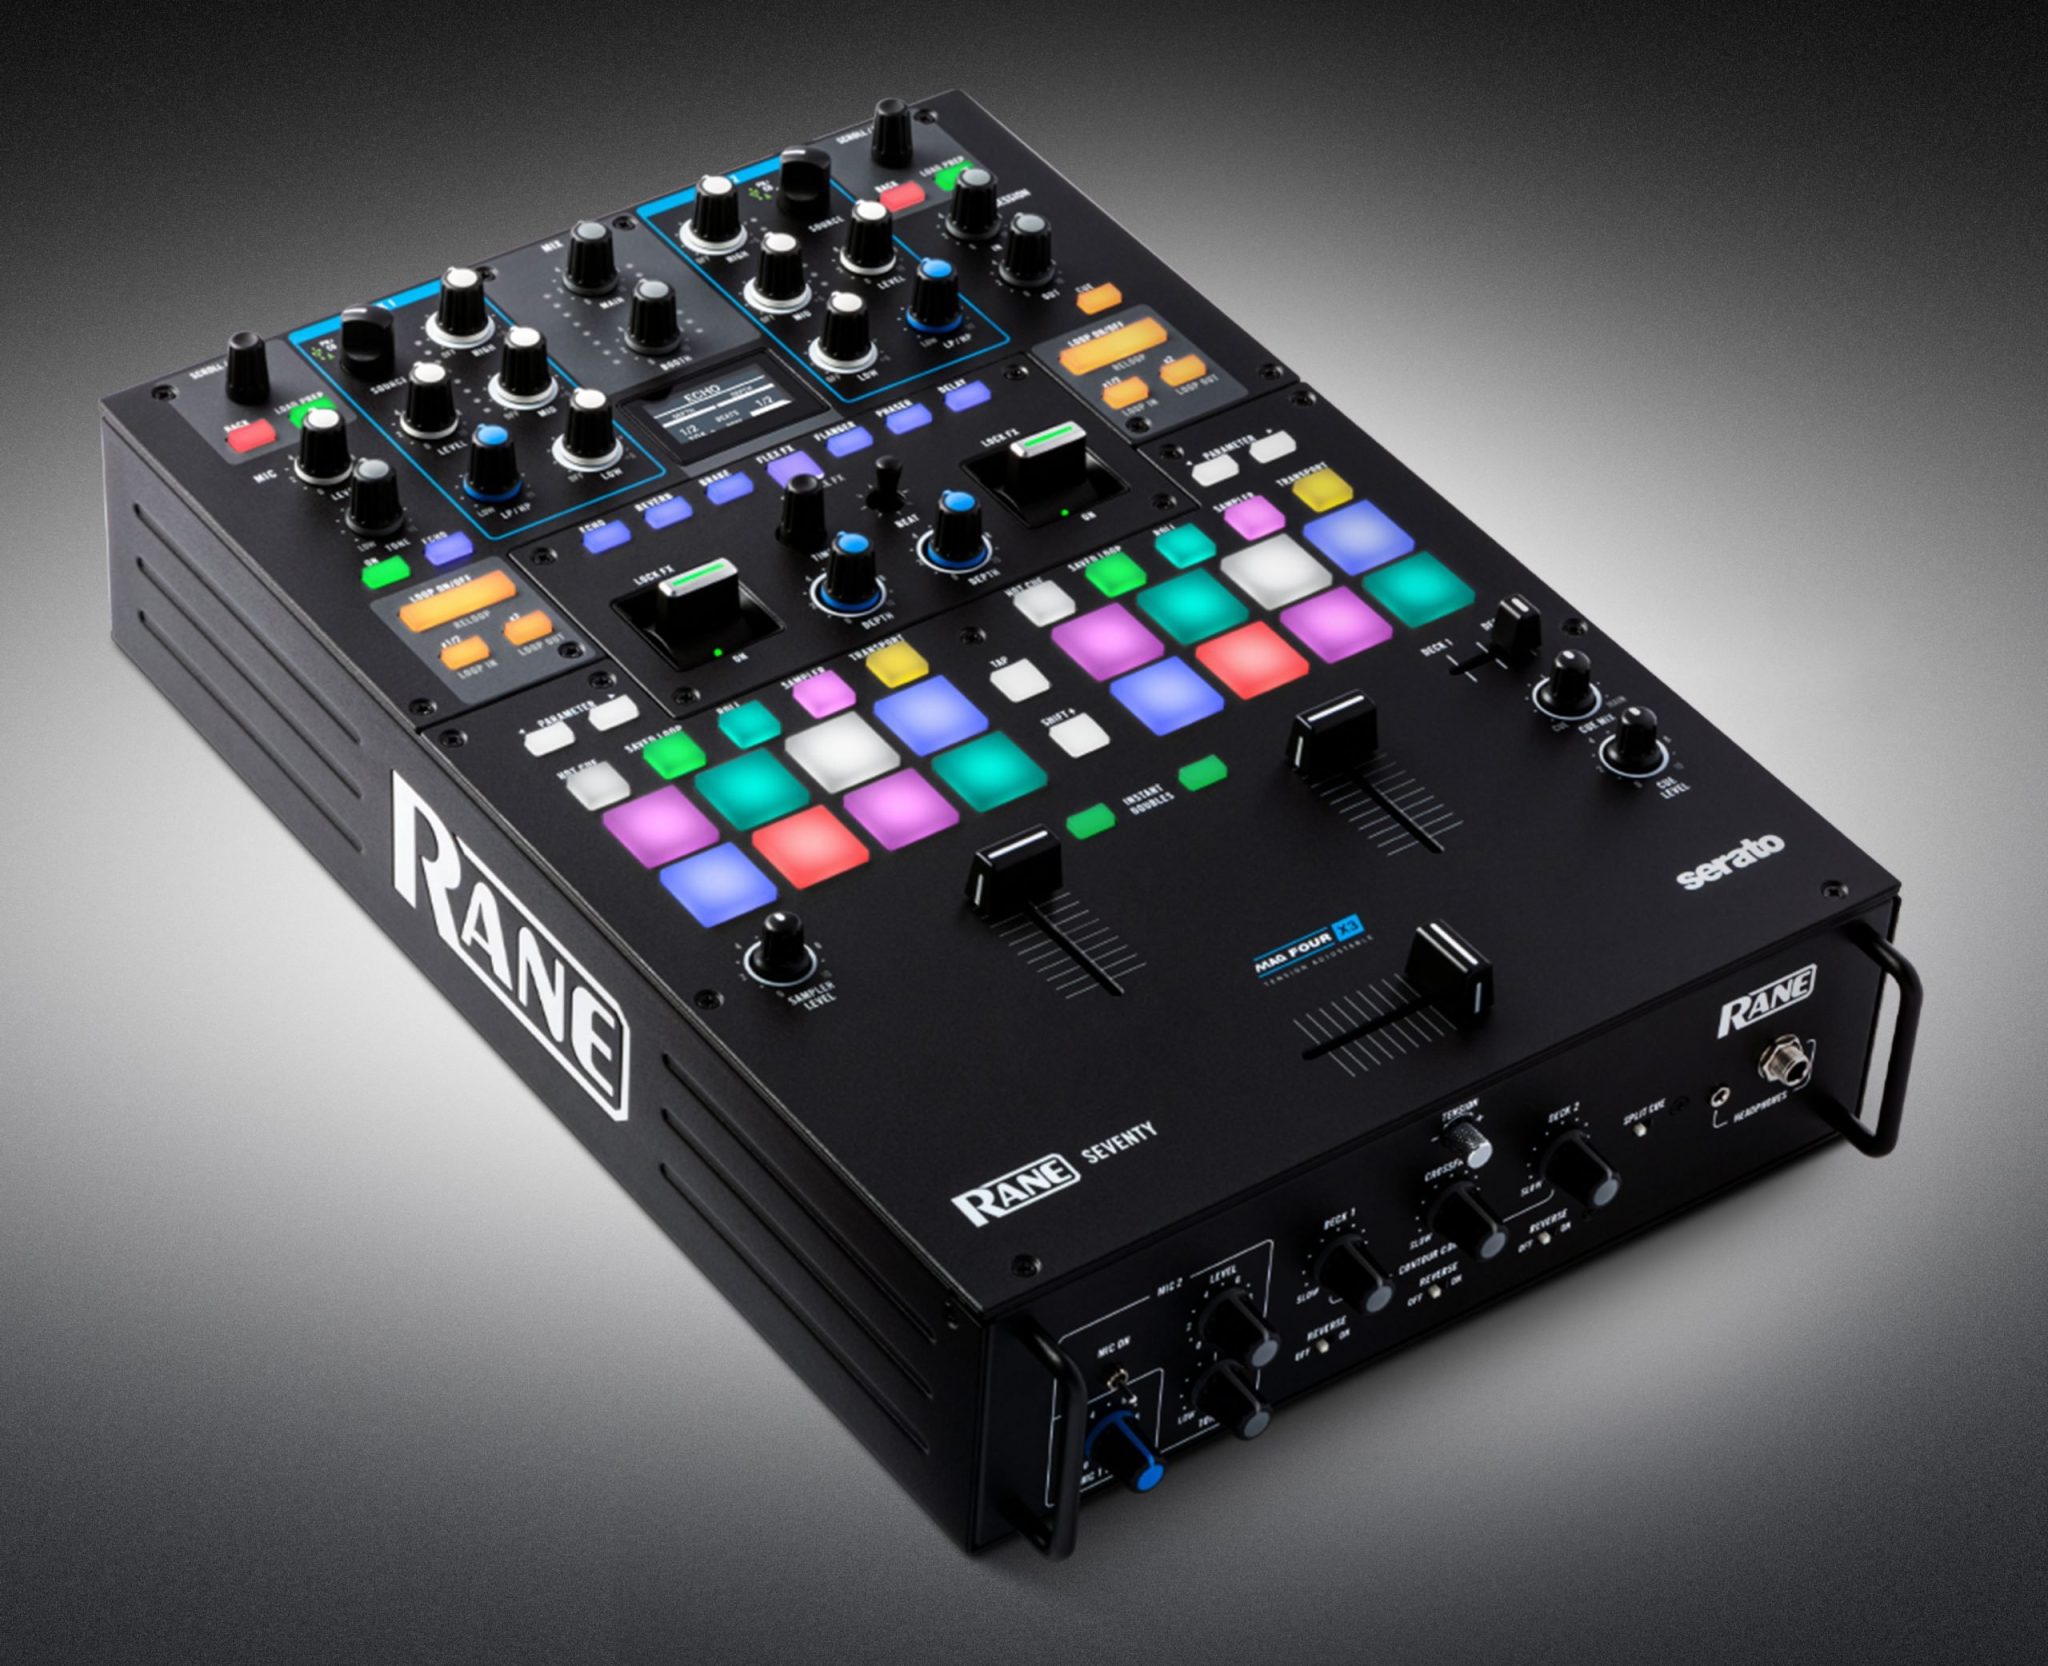 NAMM 2020: Not the Sixty Two sequel, but a Rane Seventy